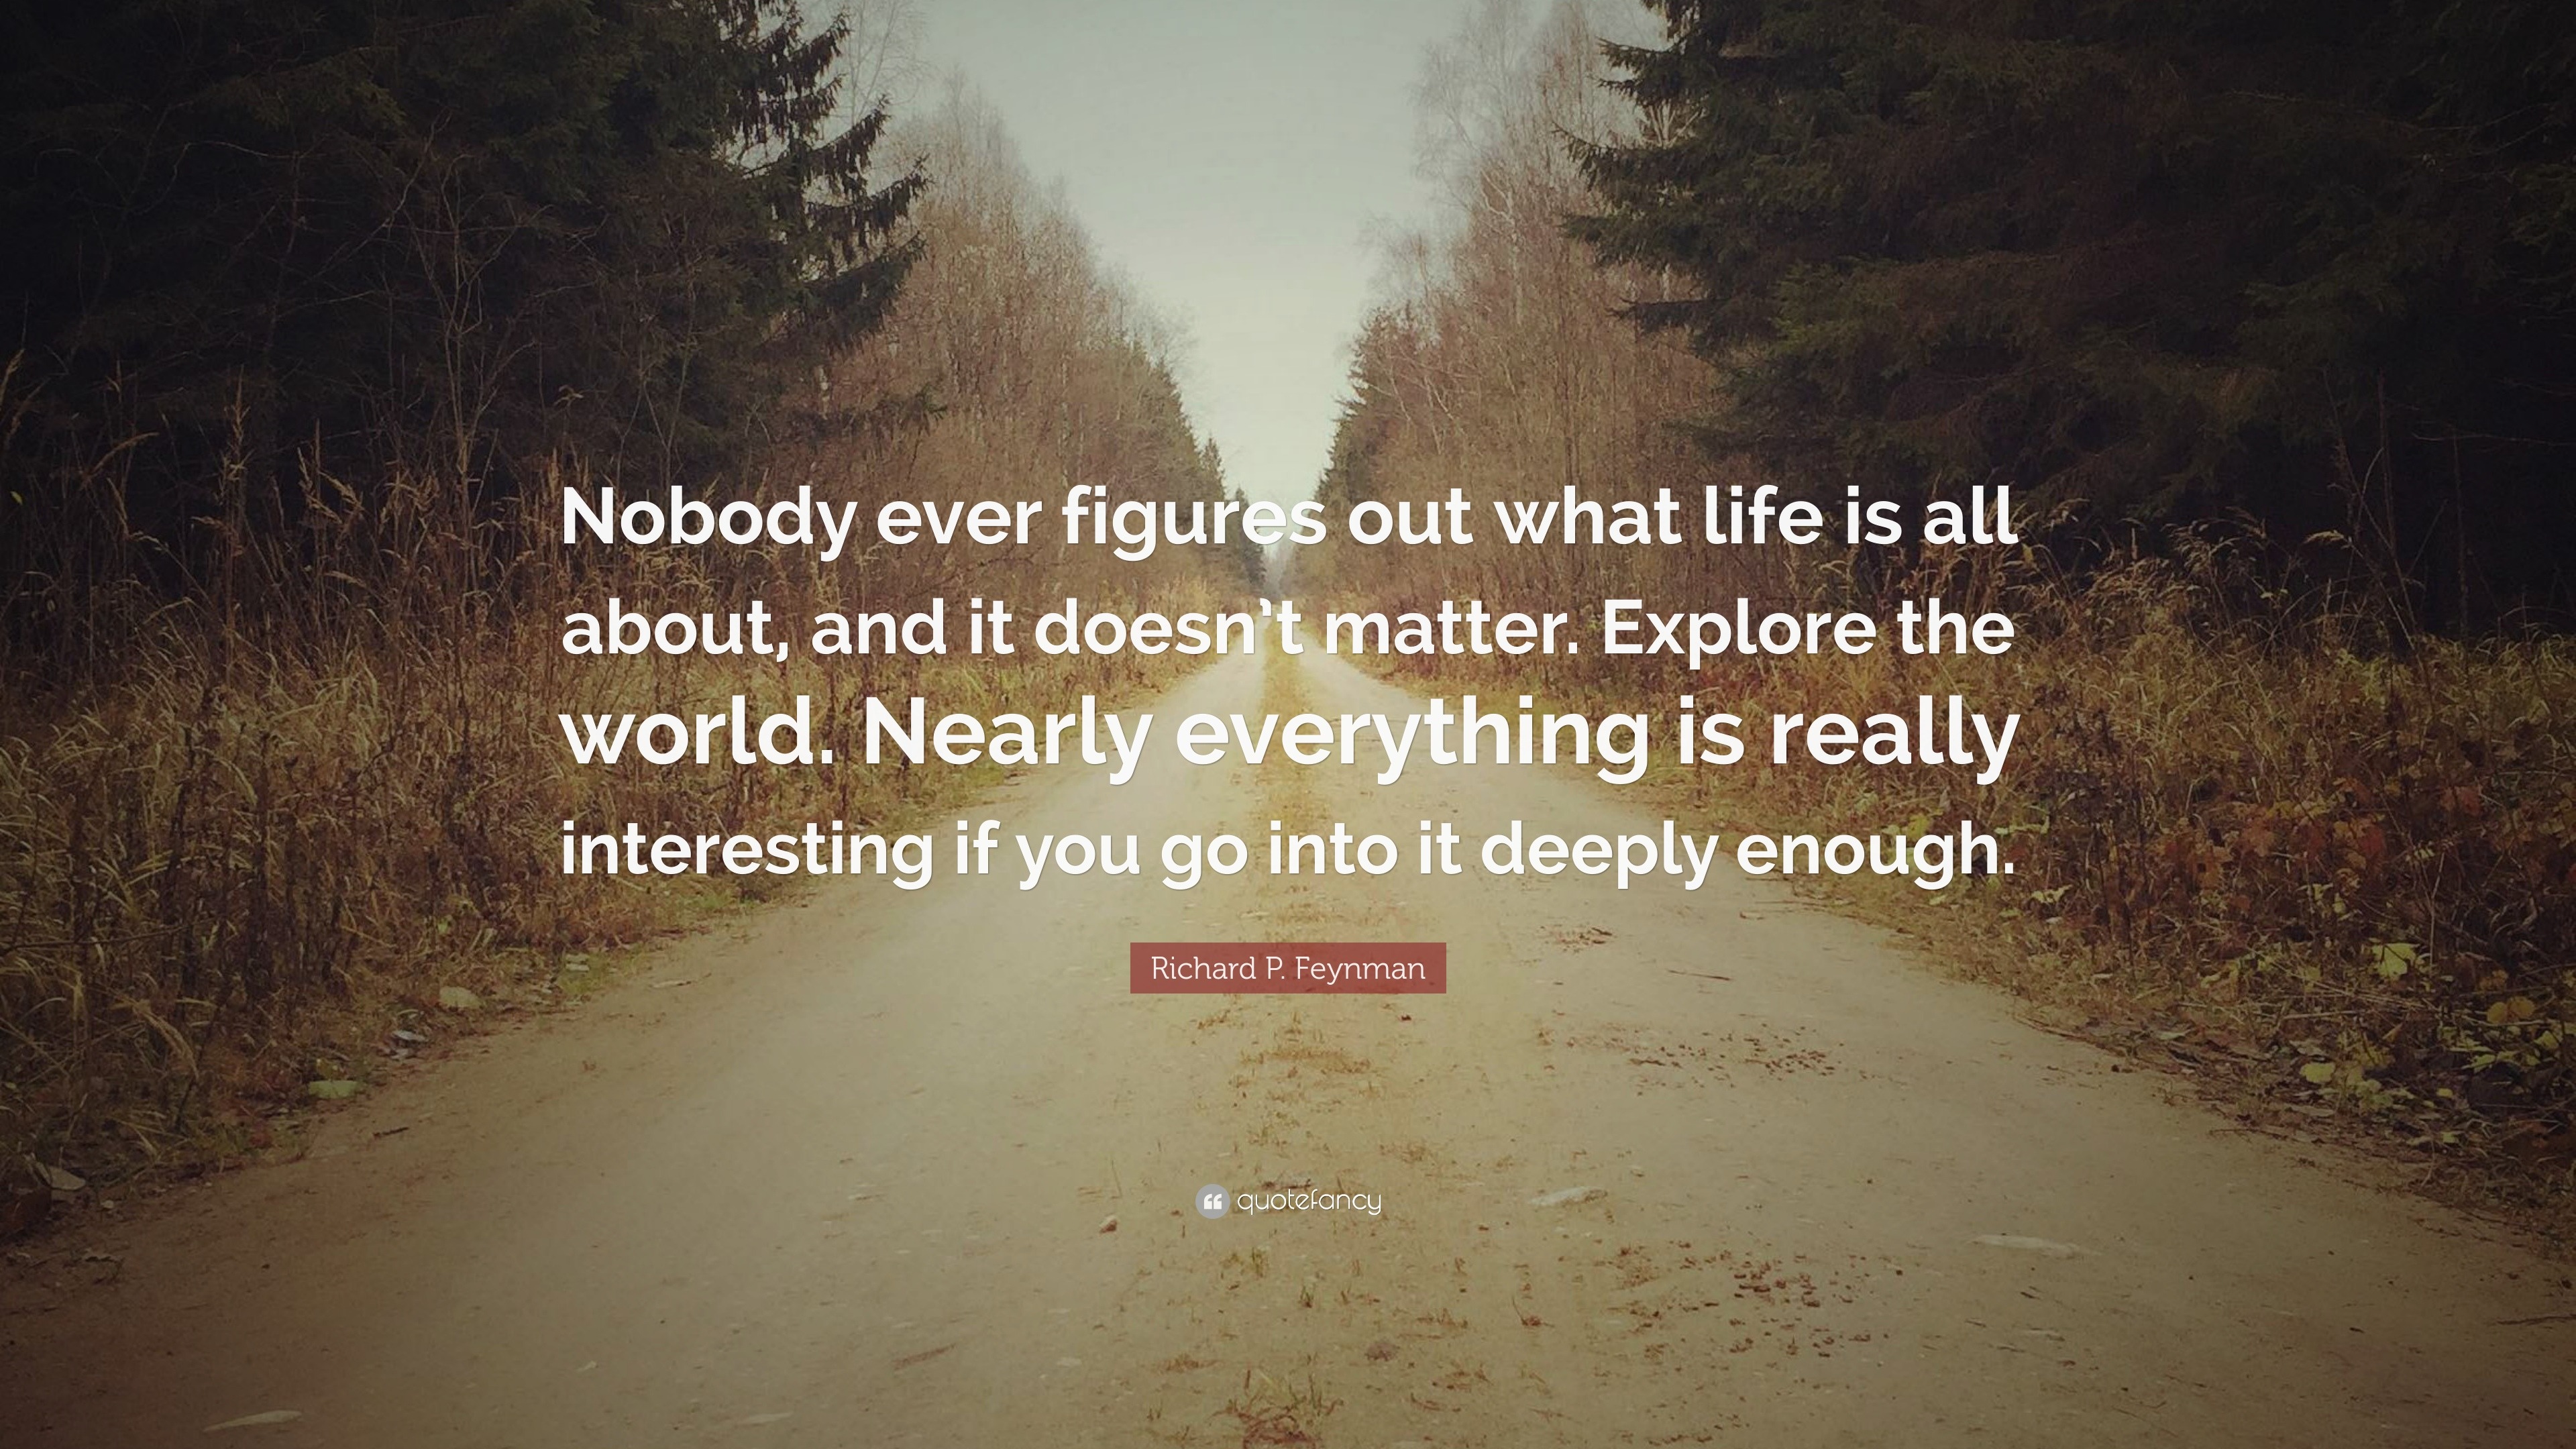 Richard P. Feynman Quote: “Nobody ever figures out what life is all